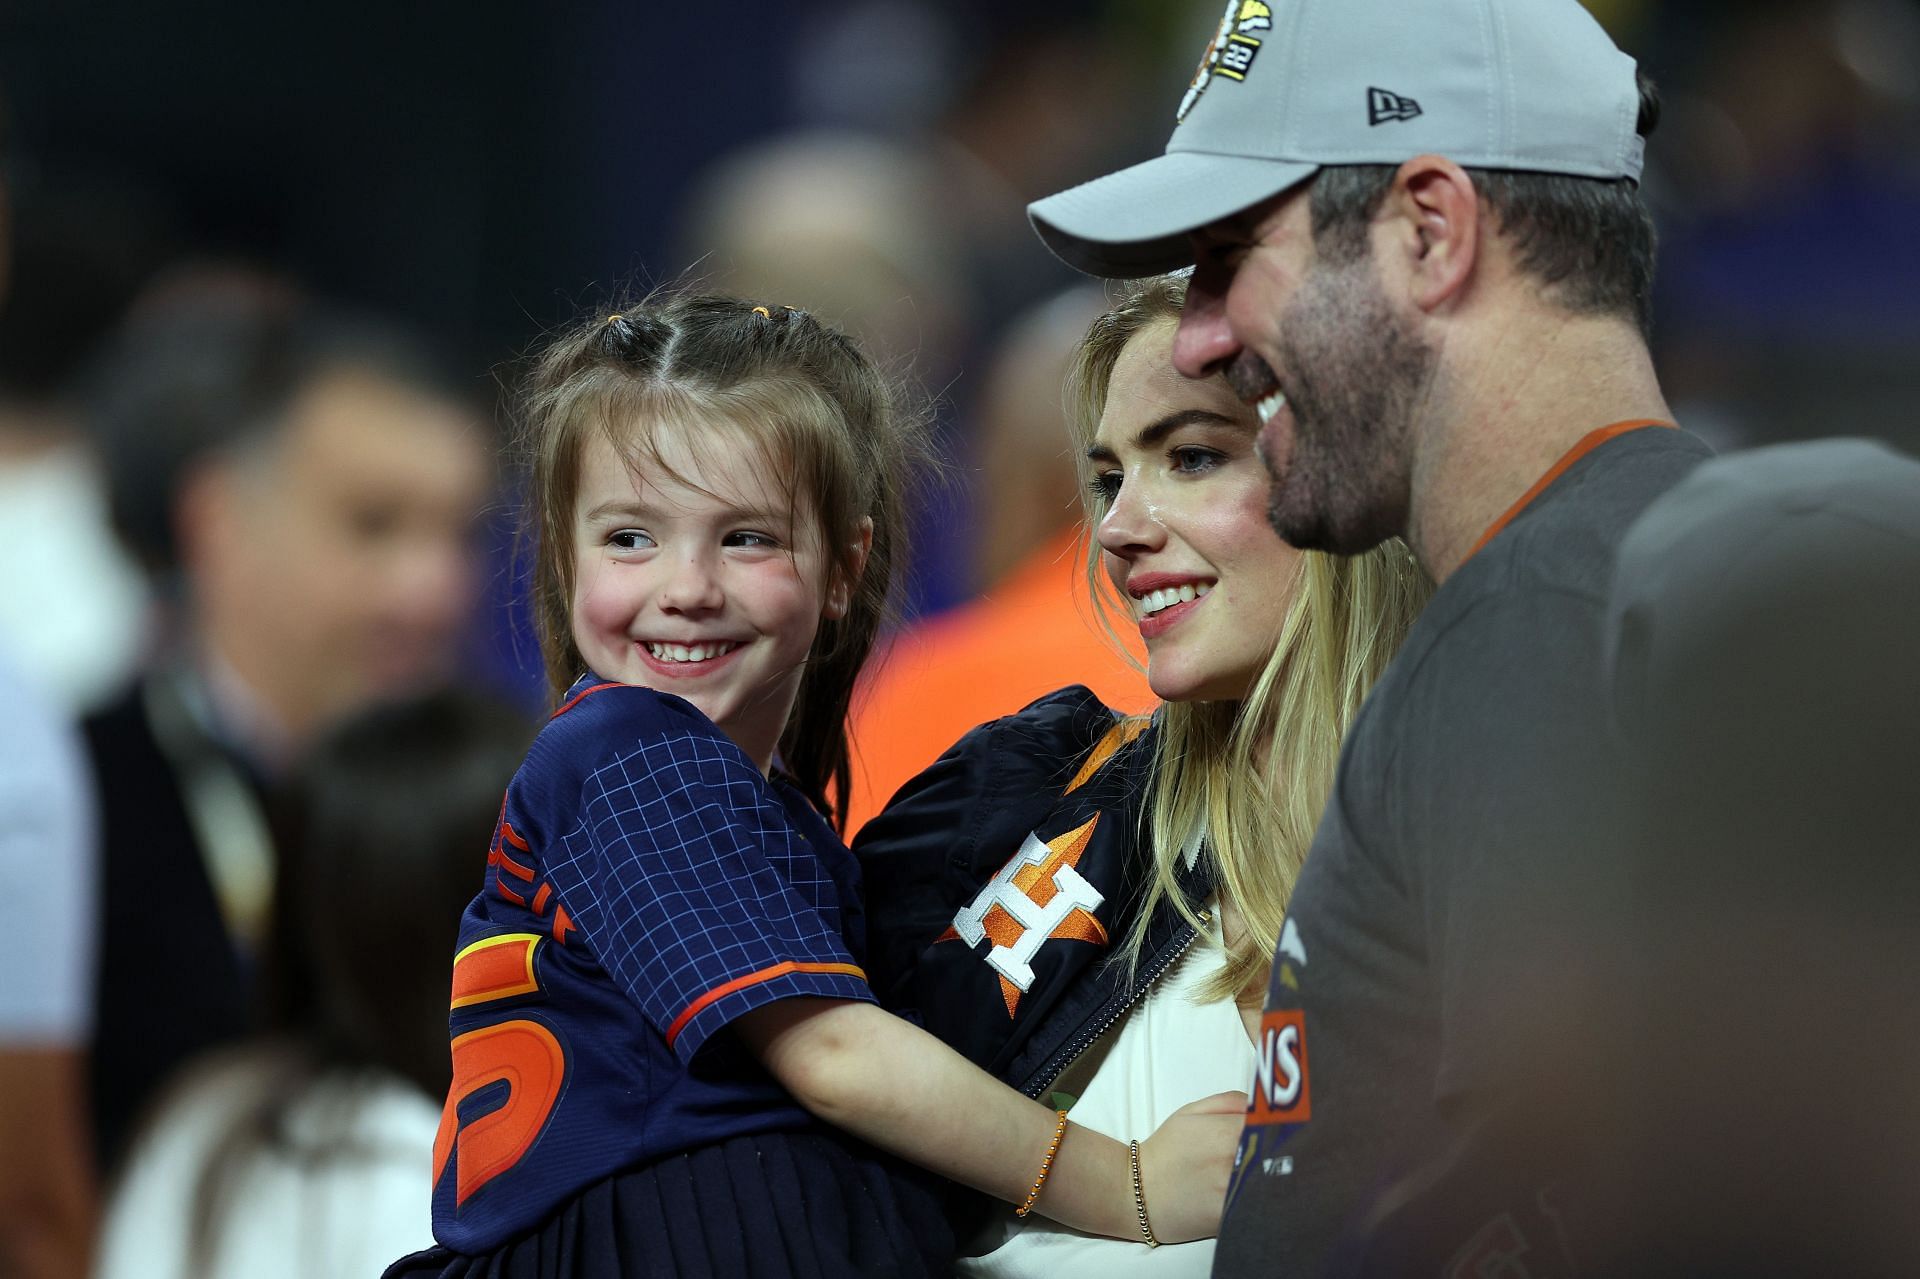 Kate Upton sticks fingers up at Phillies fans as she cheers on husband  Justin Verlander before Astros World Series win